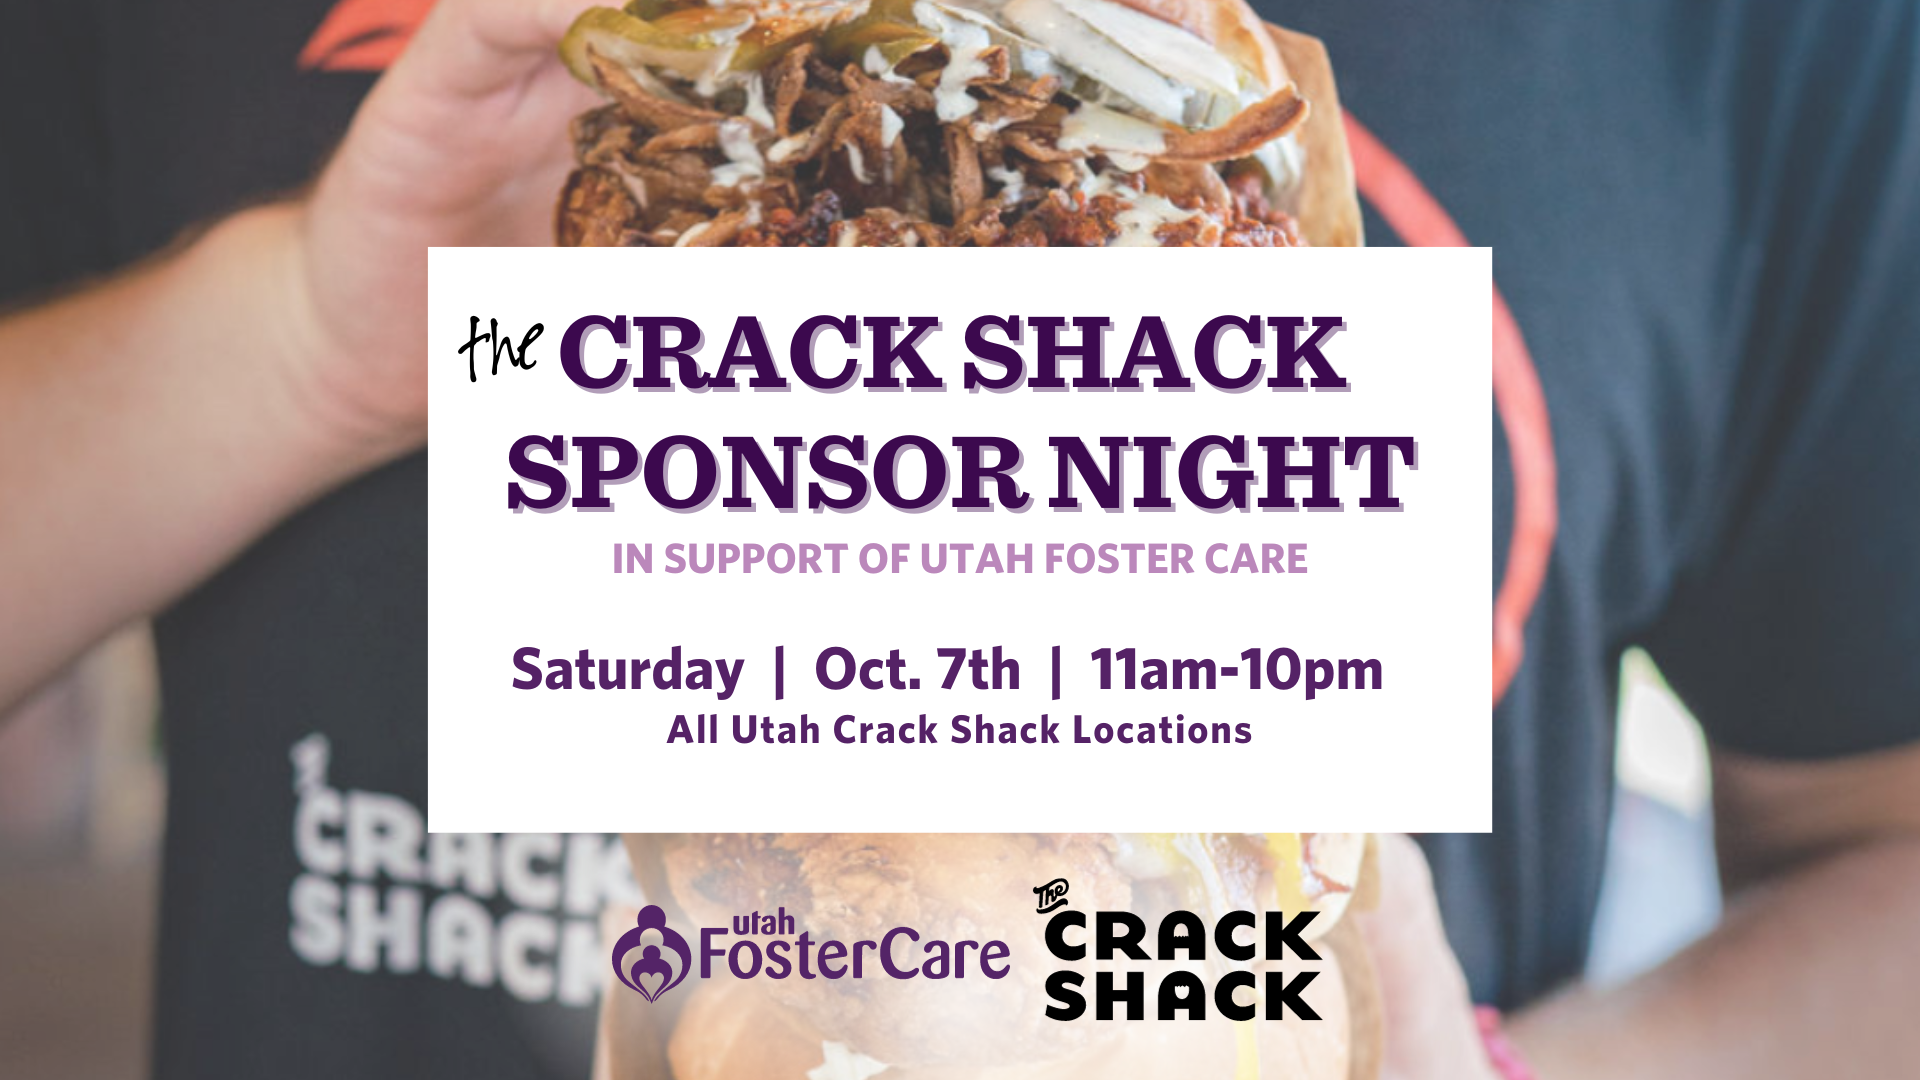 Saturday, October 7th 11am - 10pm All Crack Shack locations in Utah! Mention UTAH FOSTER CARE at any Utah Crack Shack location and 15% of your order will go to Utah Foster Care. For online orders, use promo code FOSTER Utah Foster Care will have a table at the Murray, Lehi and St. George locations from 5pm-8pm. Stop by and learn how you can get involved & foster hope for the future!